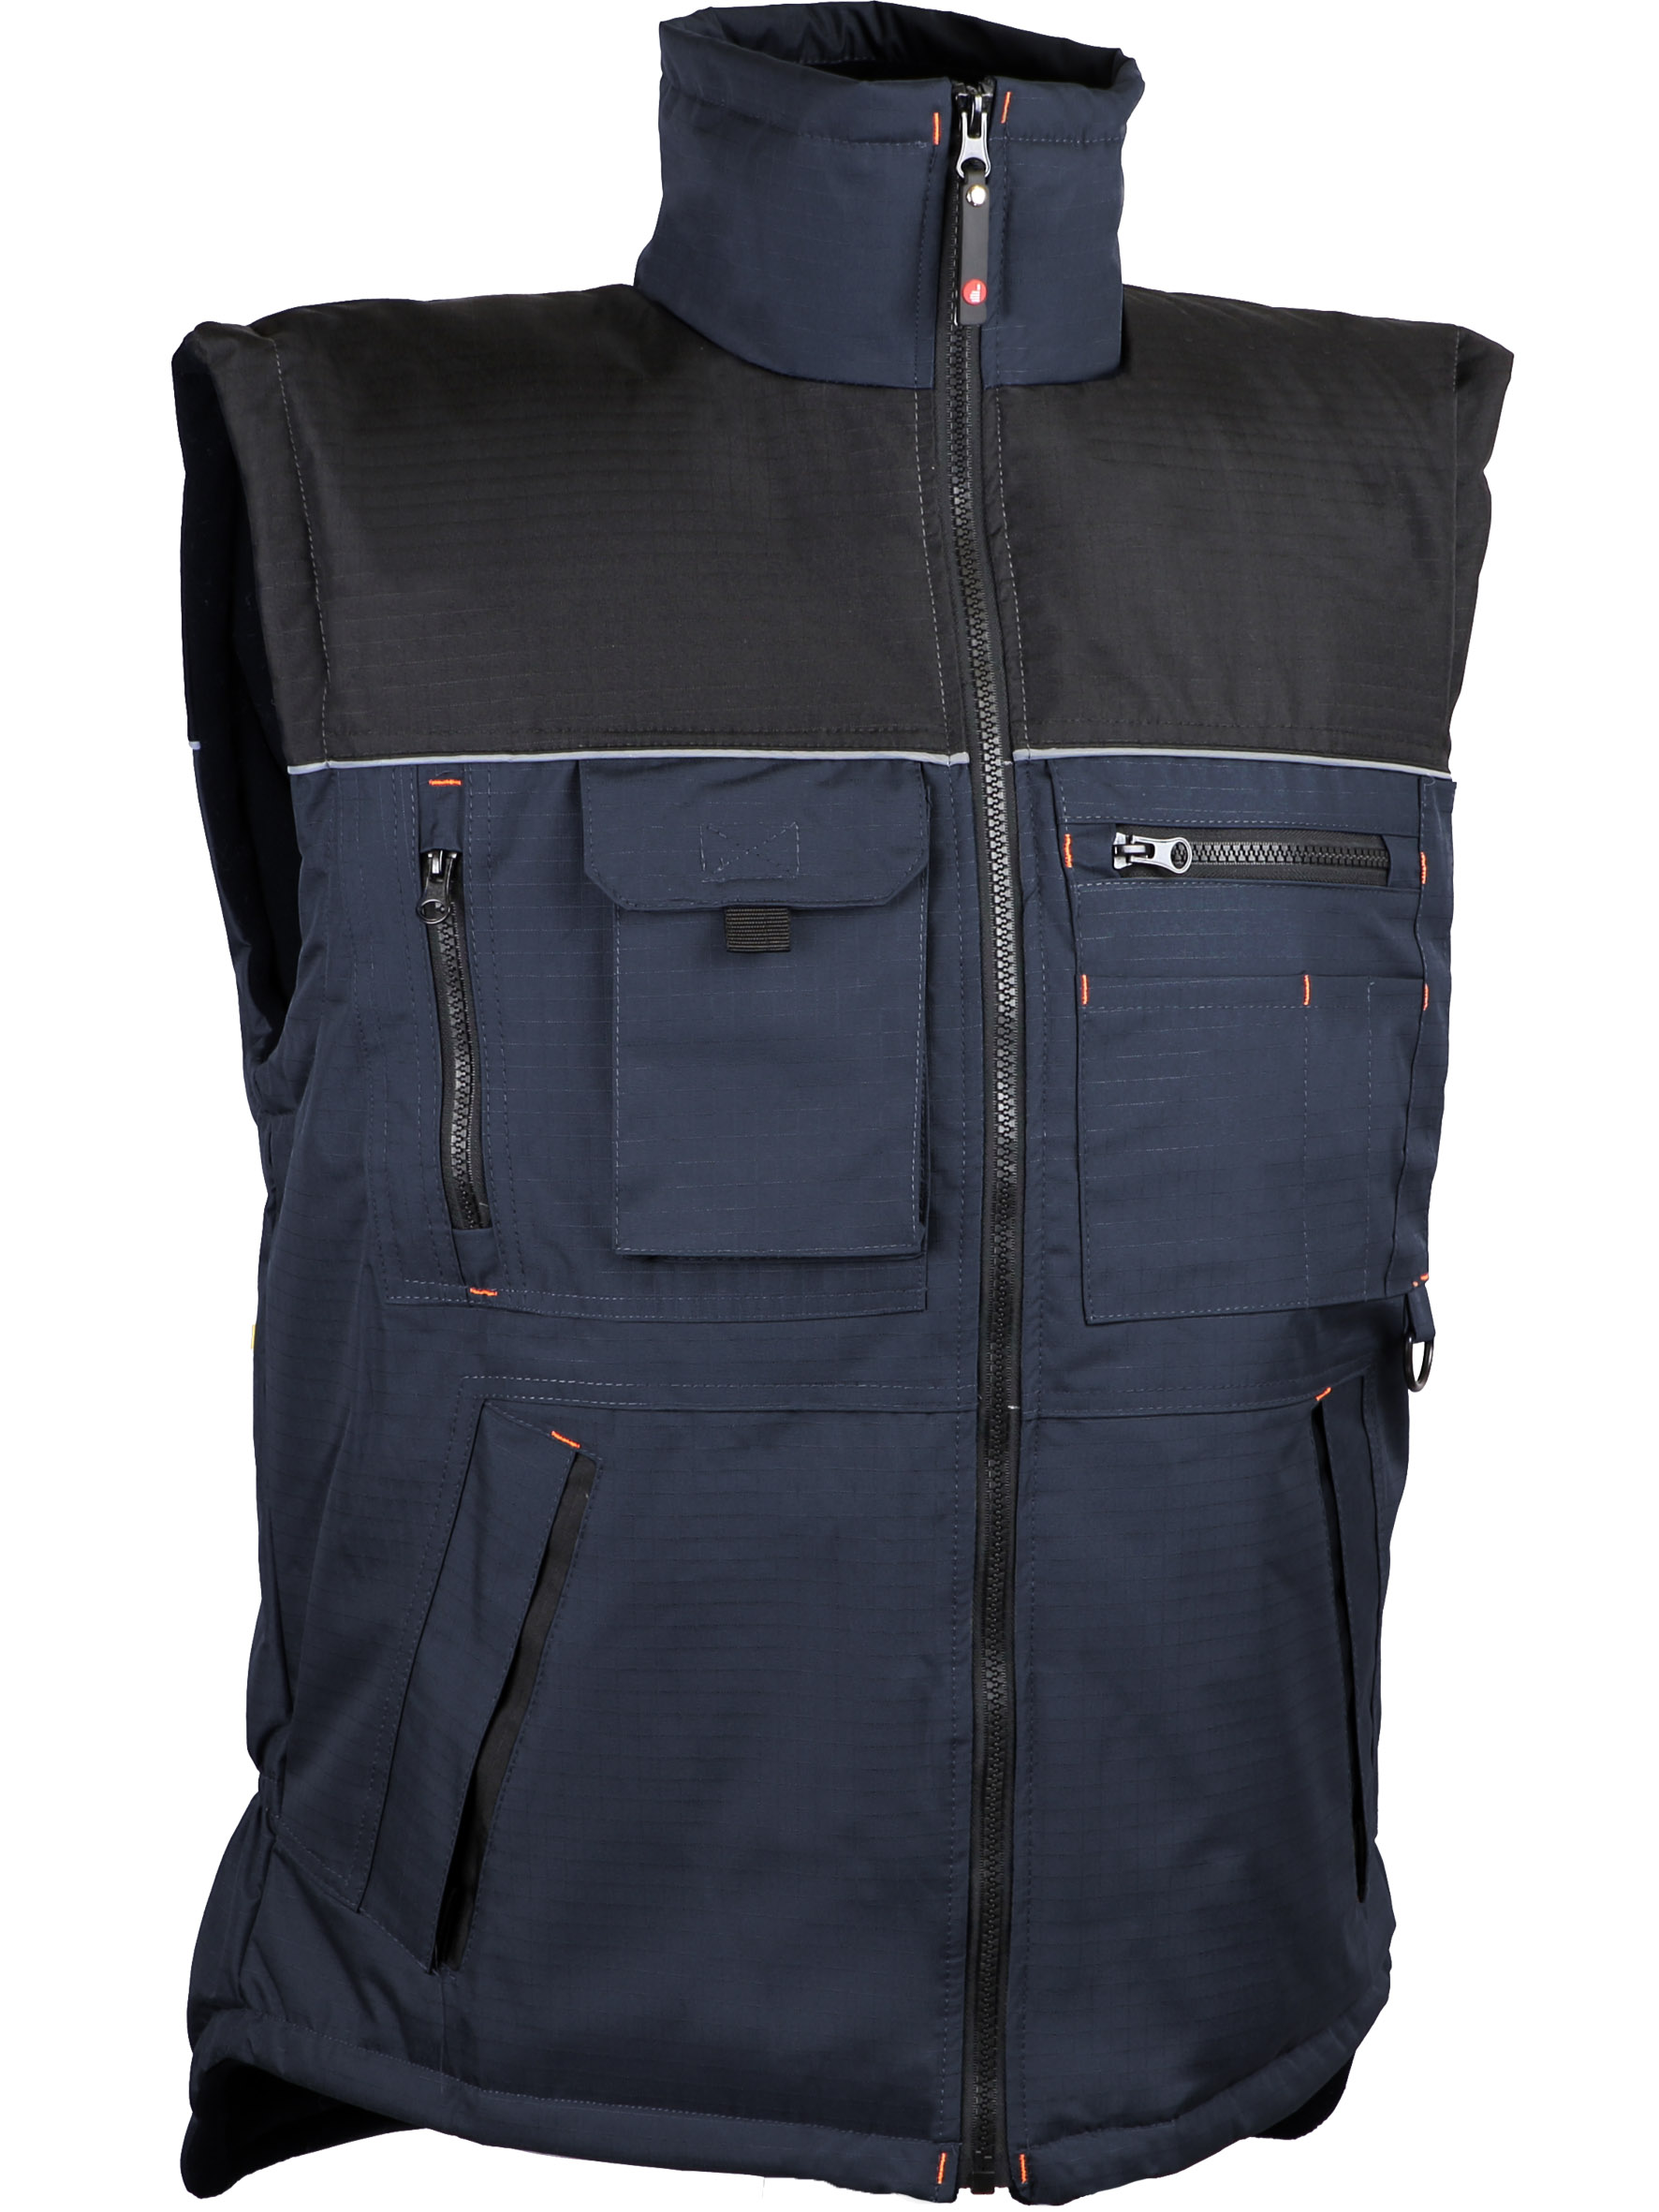 Article - Gilet polyester ripstop. Doublure polaire.